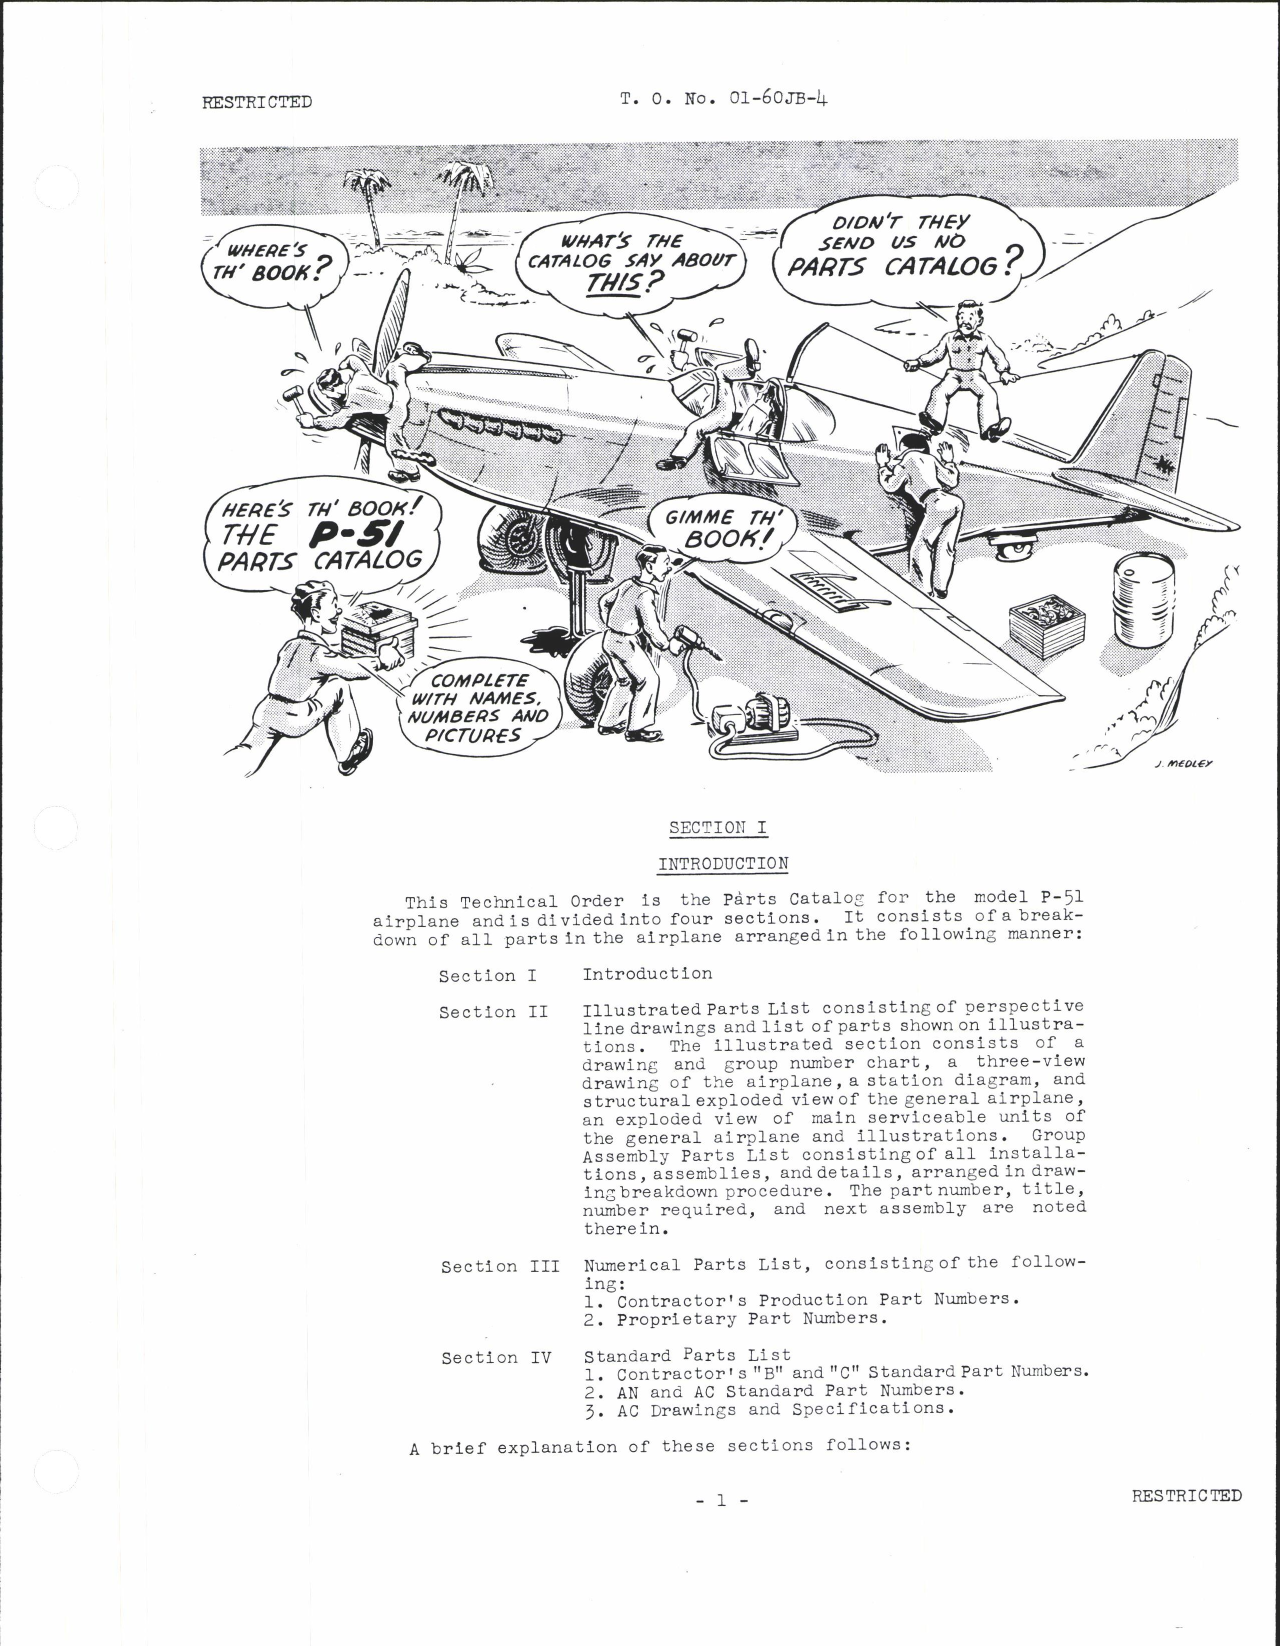 Sample page 5 from AirCorps Library document: Parts Catalog for P-51 Airplane